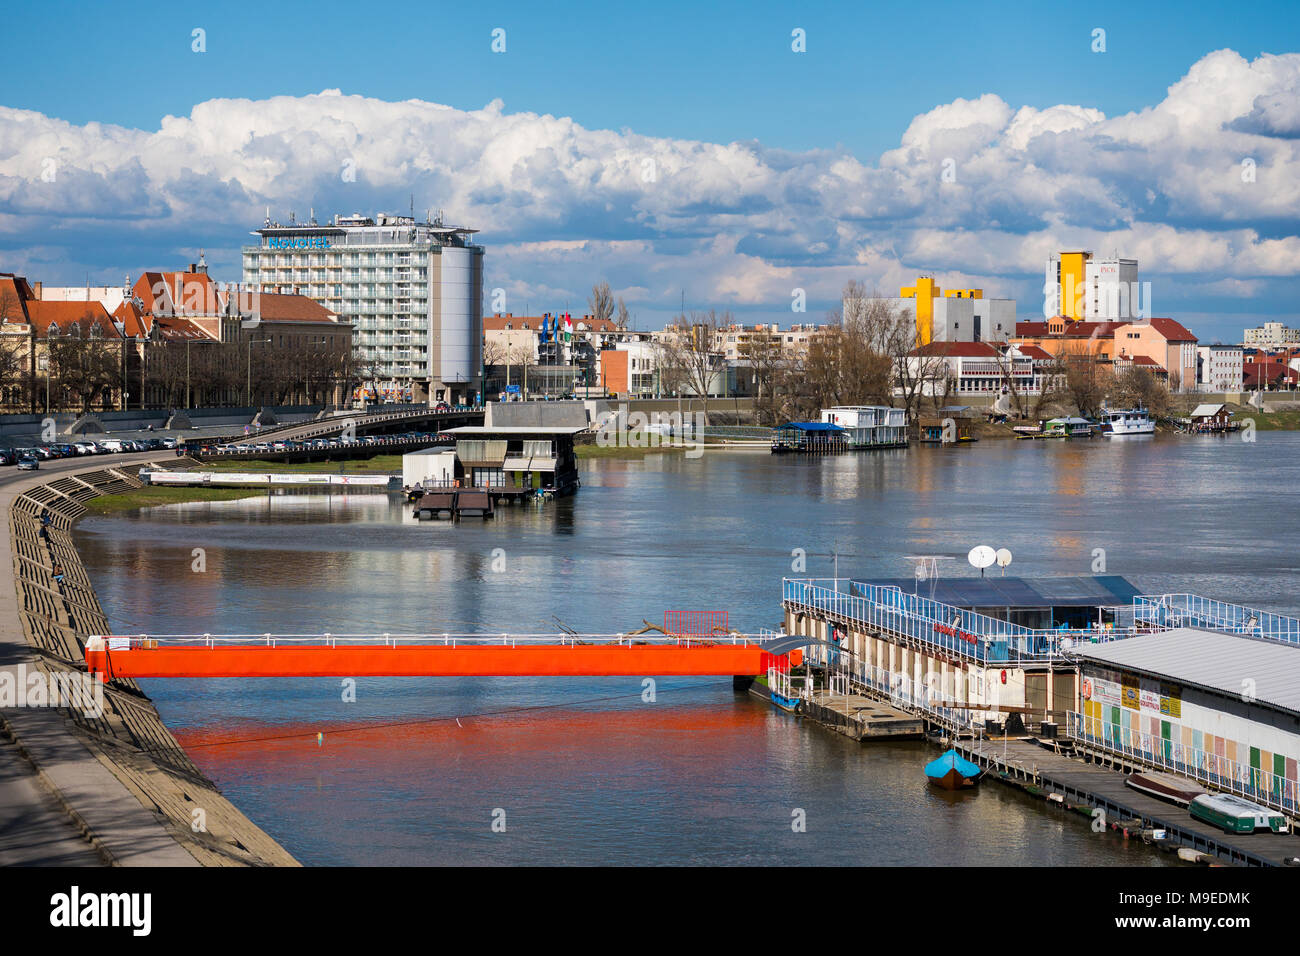 Szeged, Hungary - March 13, 2018: View of Tisza river(Tisa river) in Szeged Stock Photo